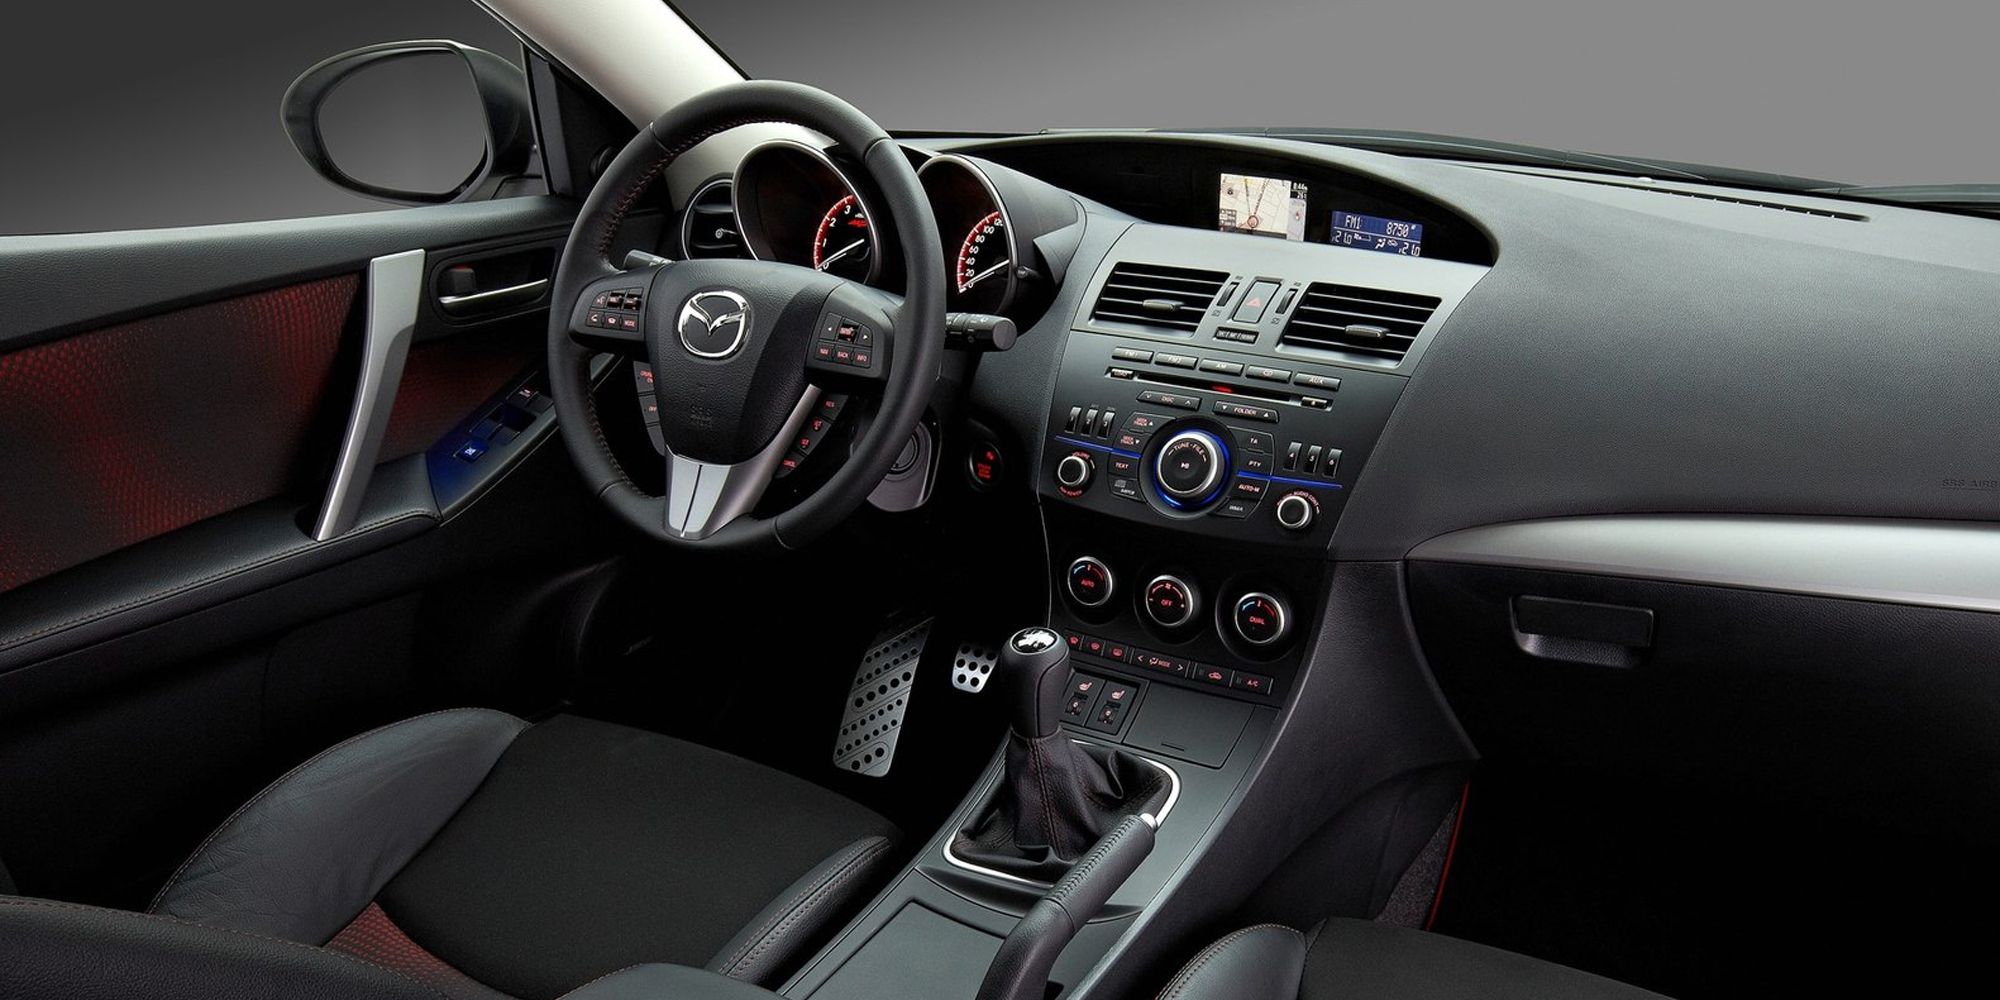 The interior of the second generation Mazdaspeed 3